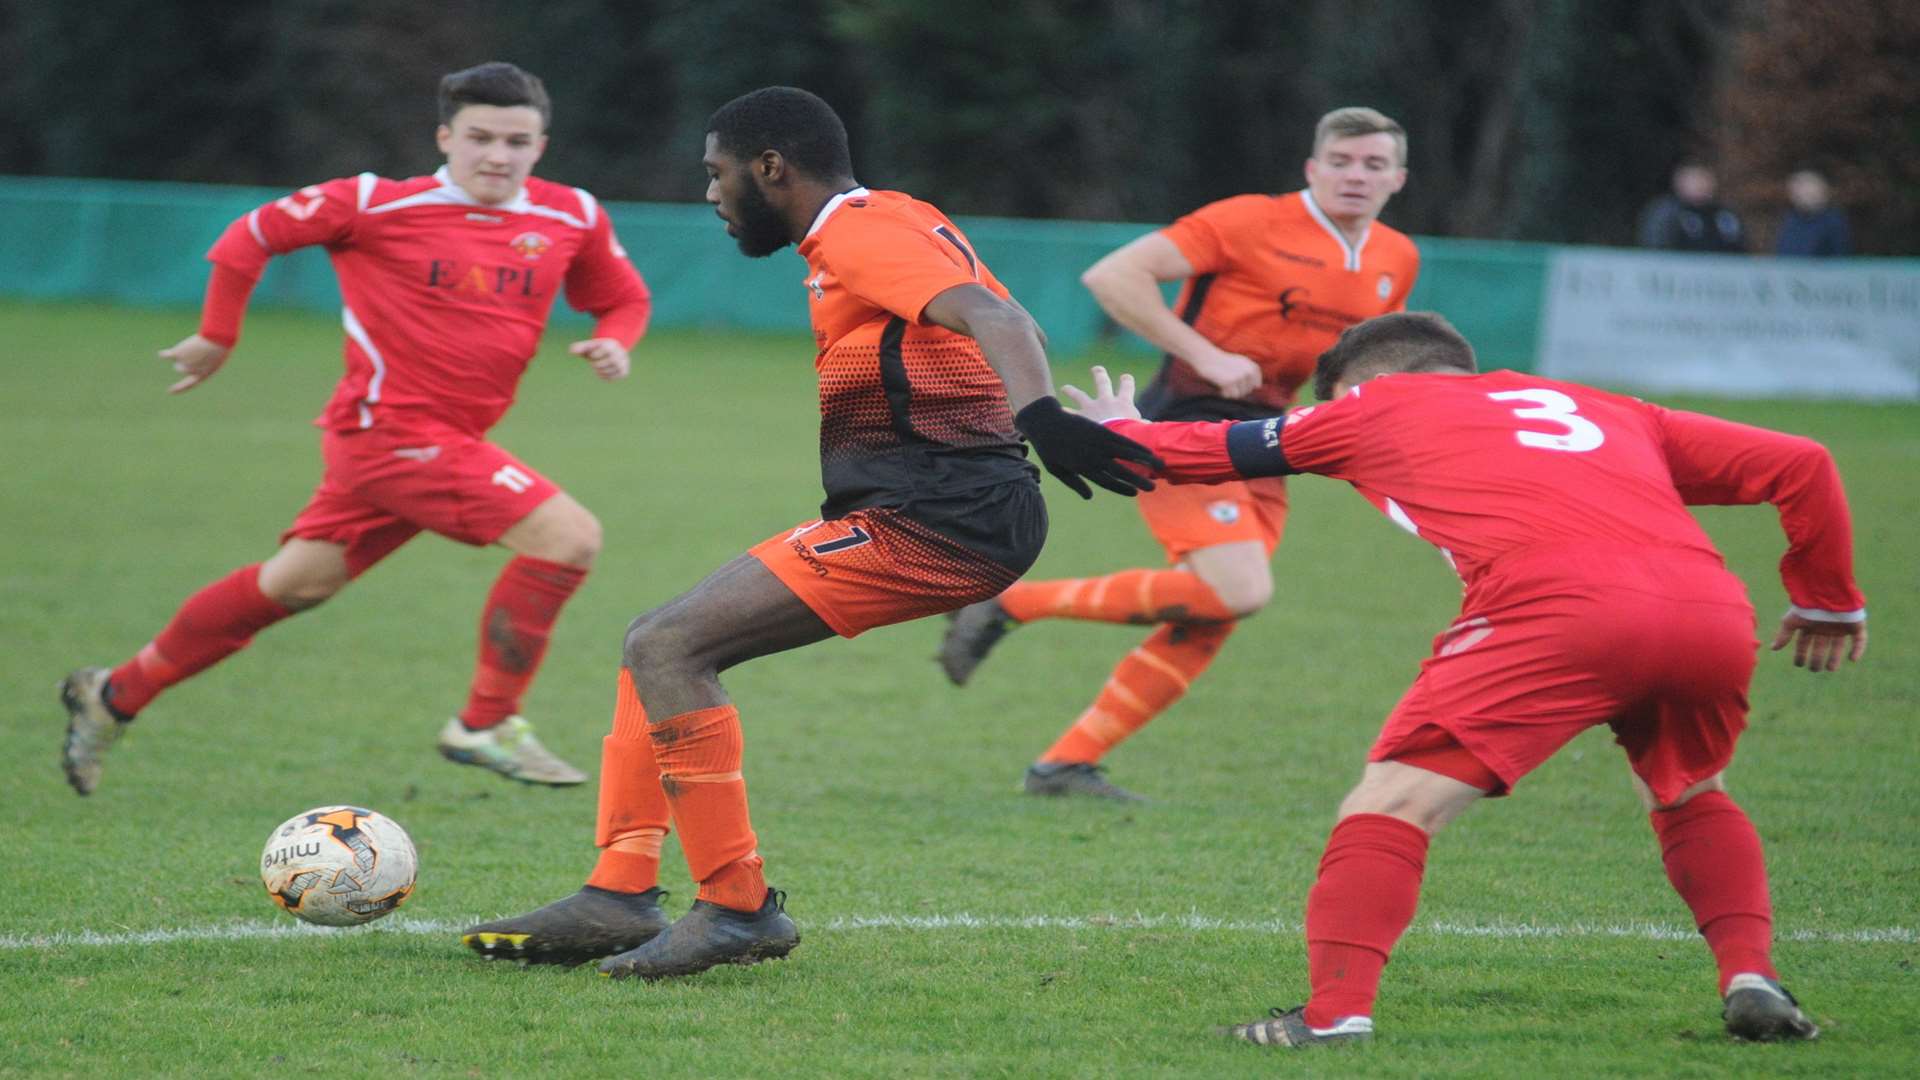 Lordswood's Helge Orome is tracked by Hollands & Blair's Lewis Taylor. Picture: Steve Crispe